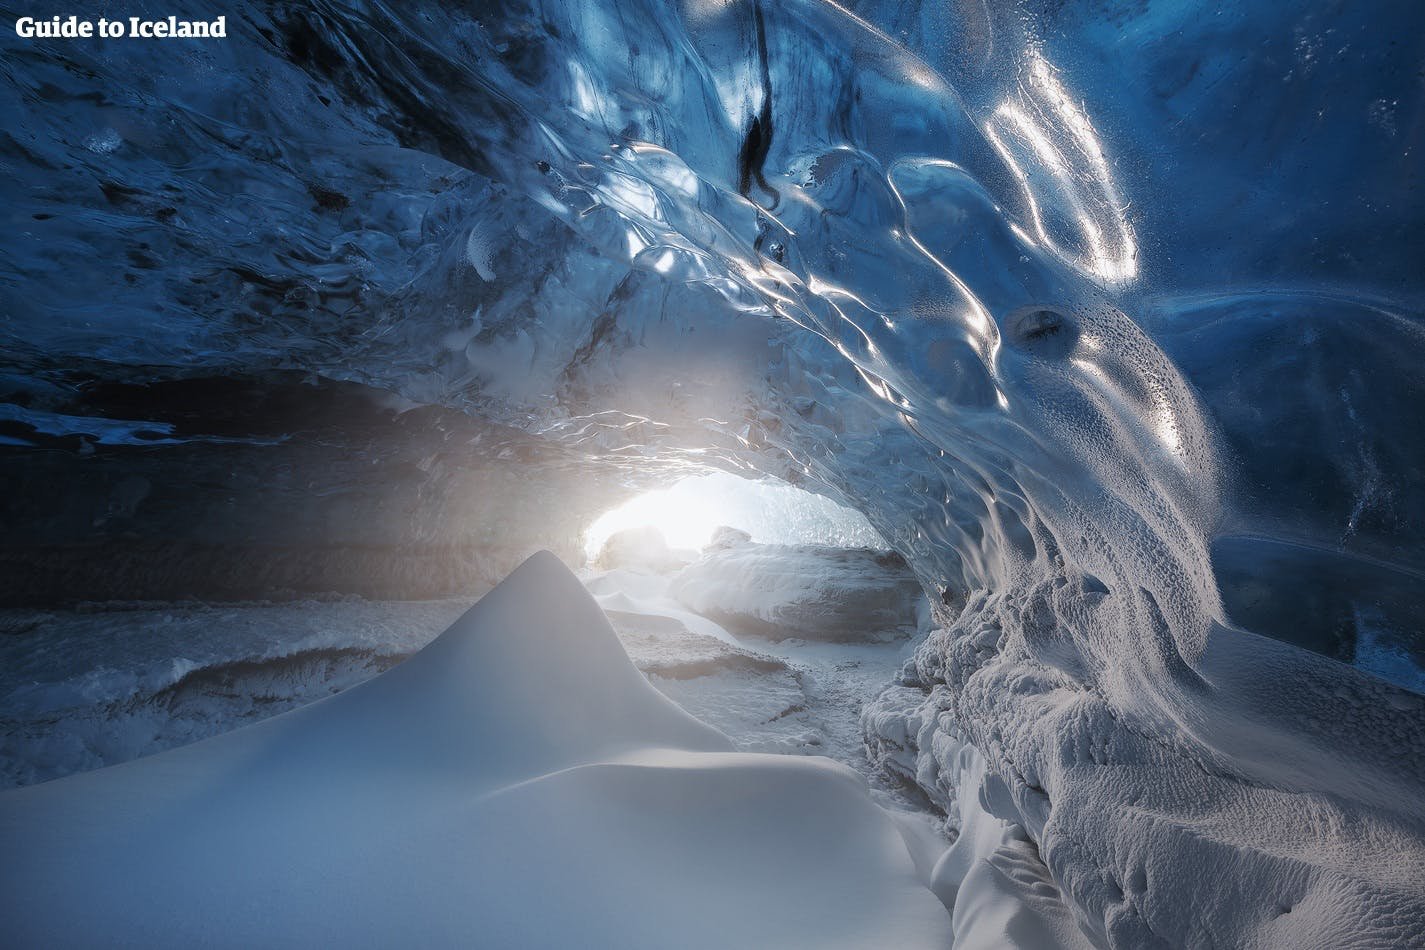 stepping-into-an-ice-cave-in-iceland-is-like-stepping-into-a-fantasy-world.jpg.1832284350c3f82...jpg